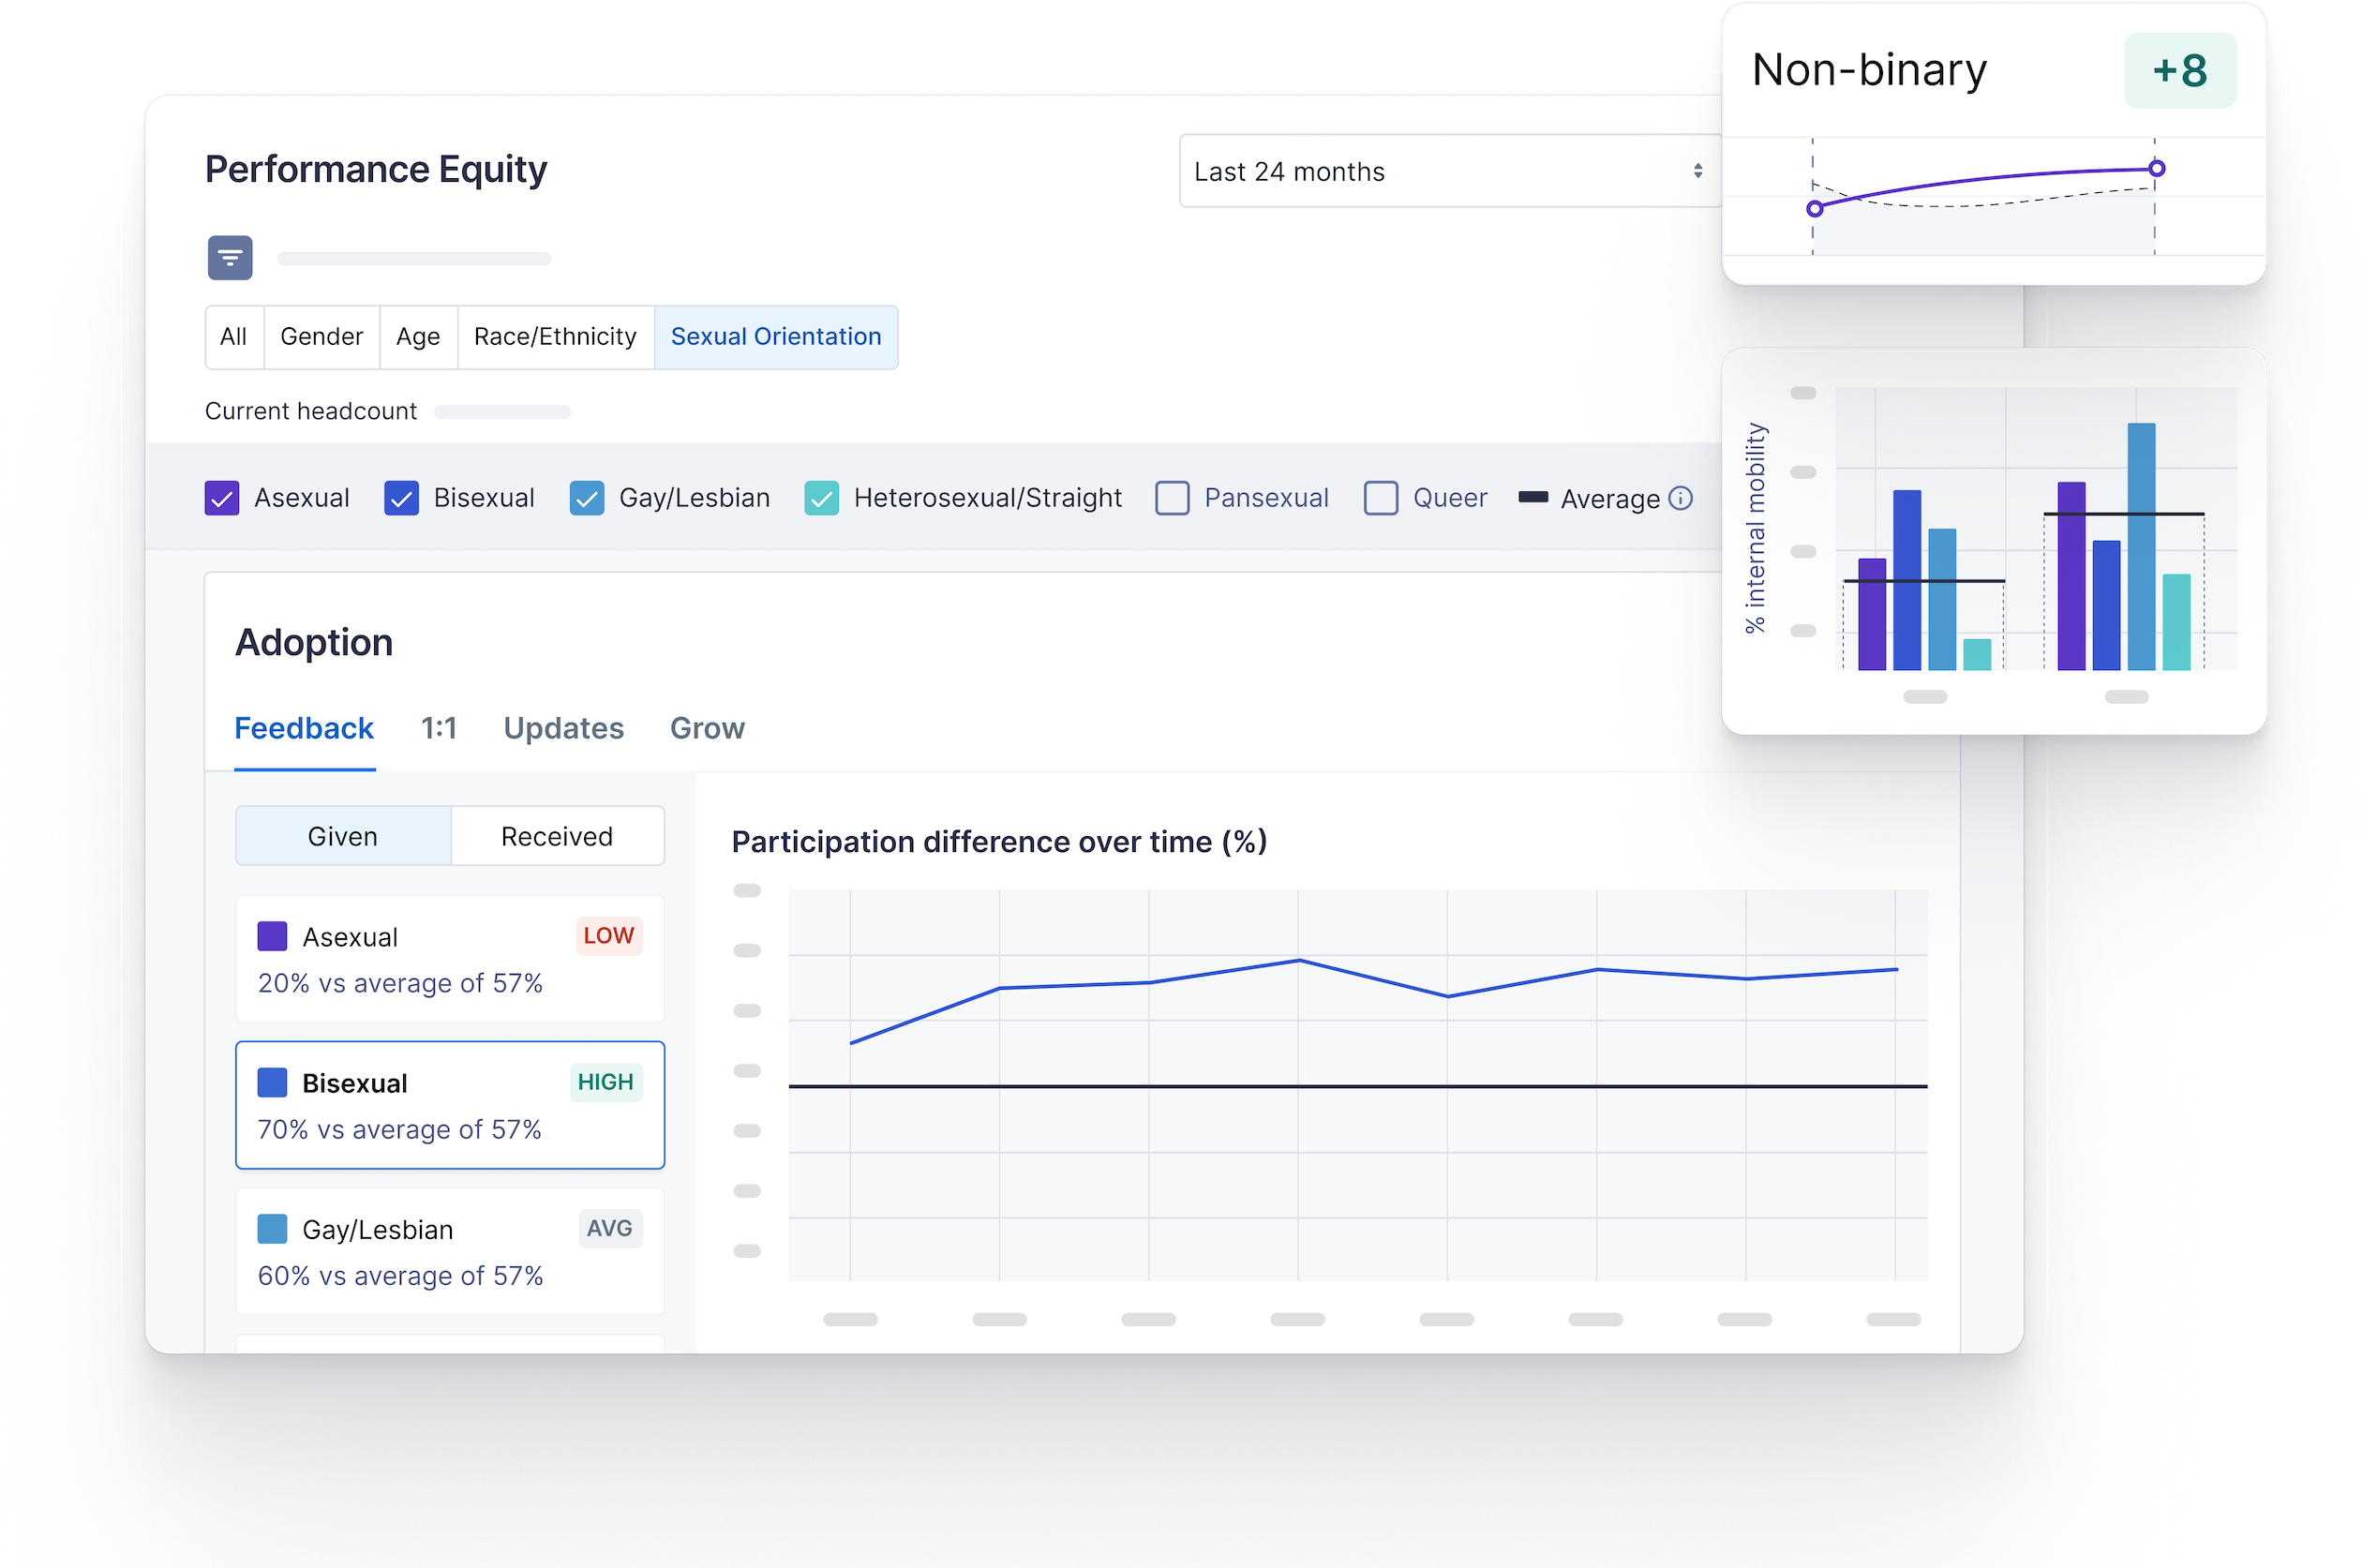 a screenshot of Lattice's Performance Equity dashboard that shows participation rates in Feedback, 1:1s, Updates, and Grow